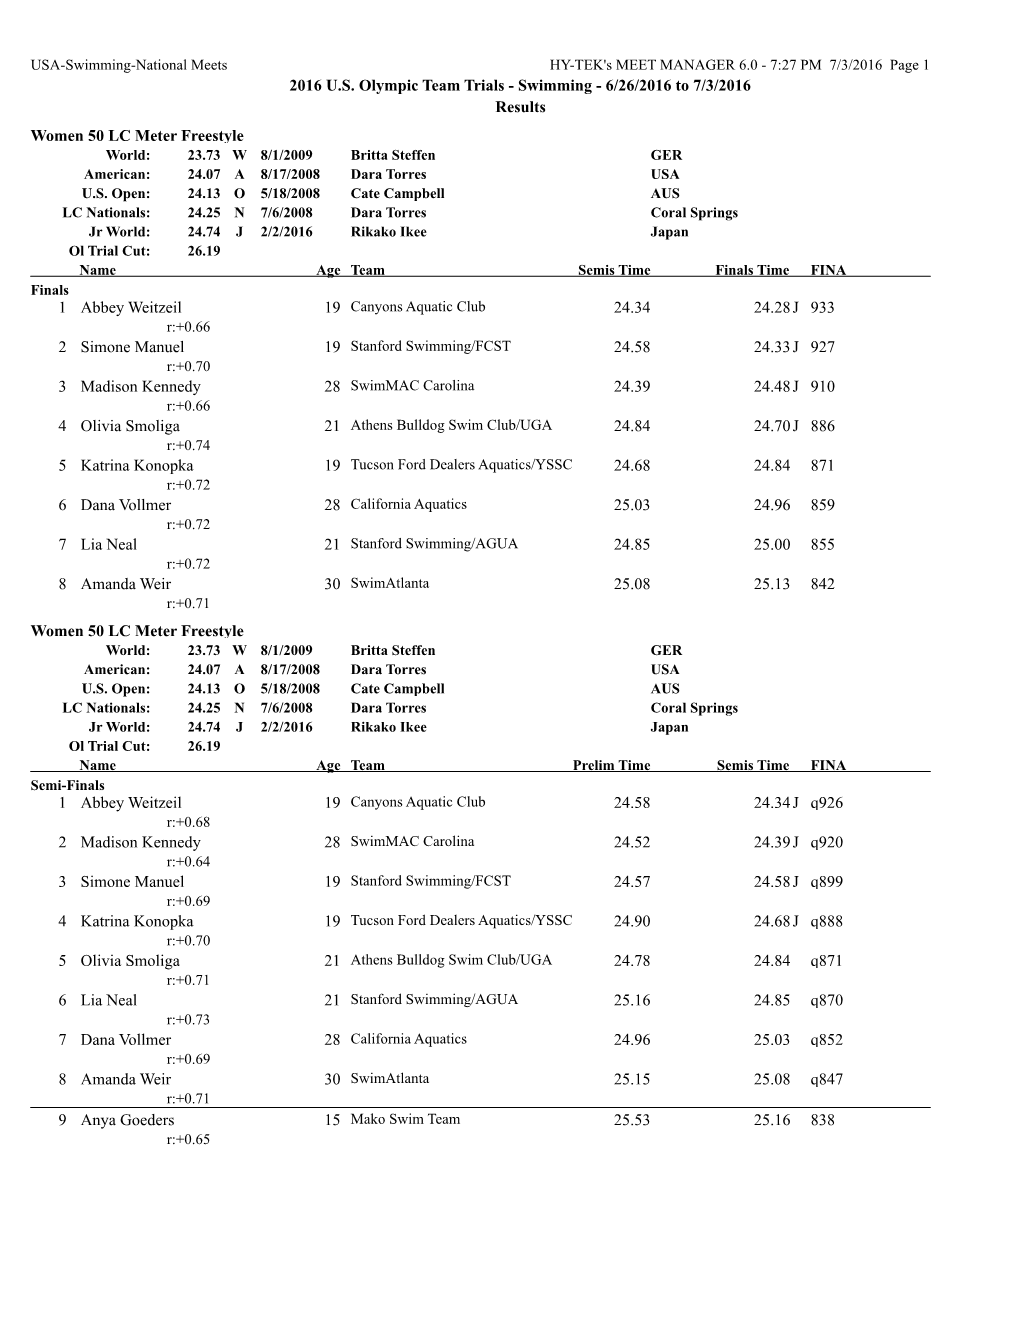 2016 Olympic Trials Results